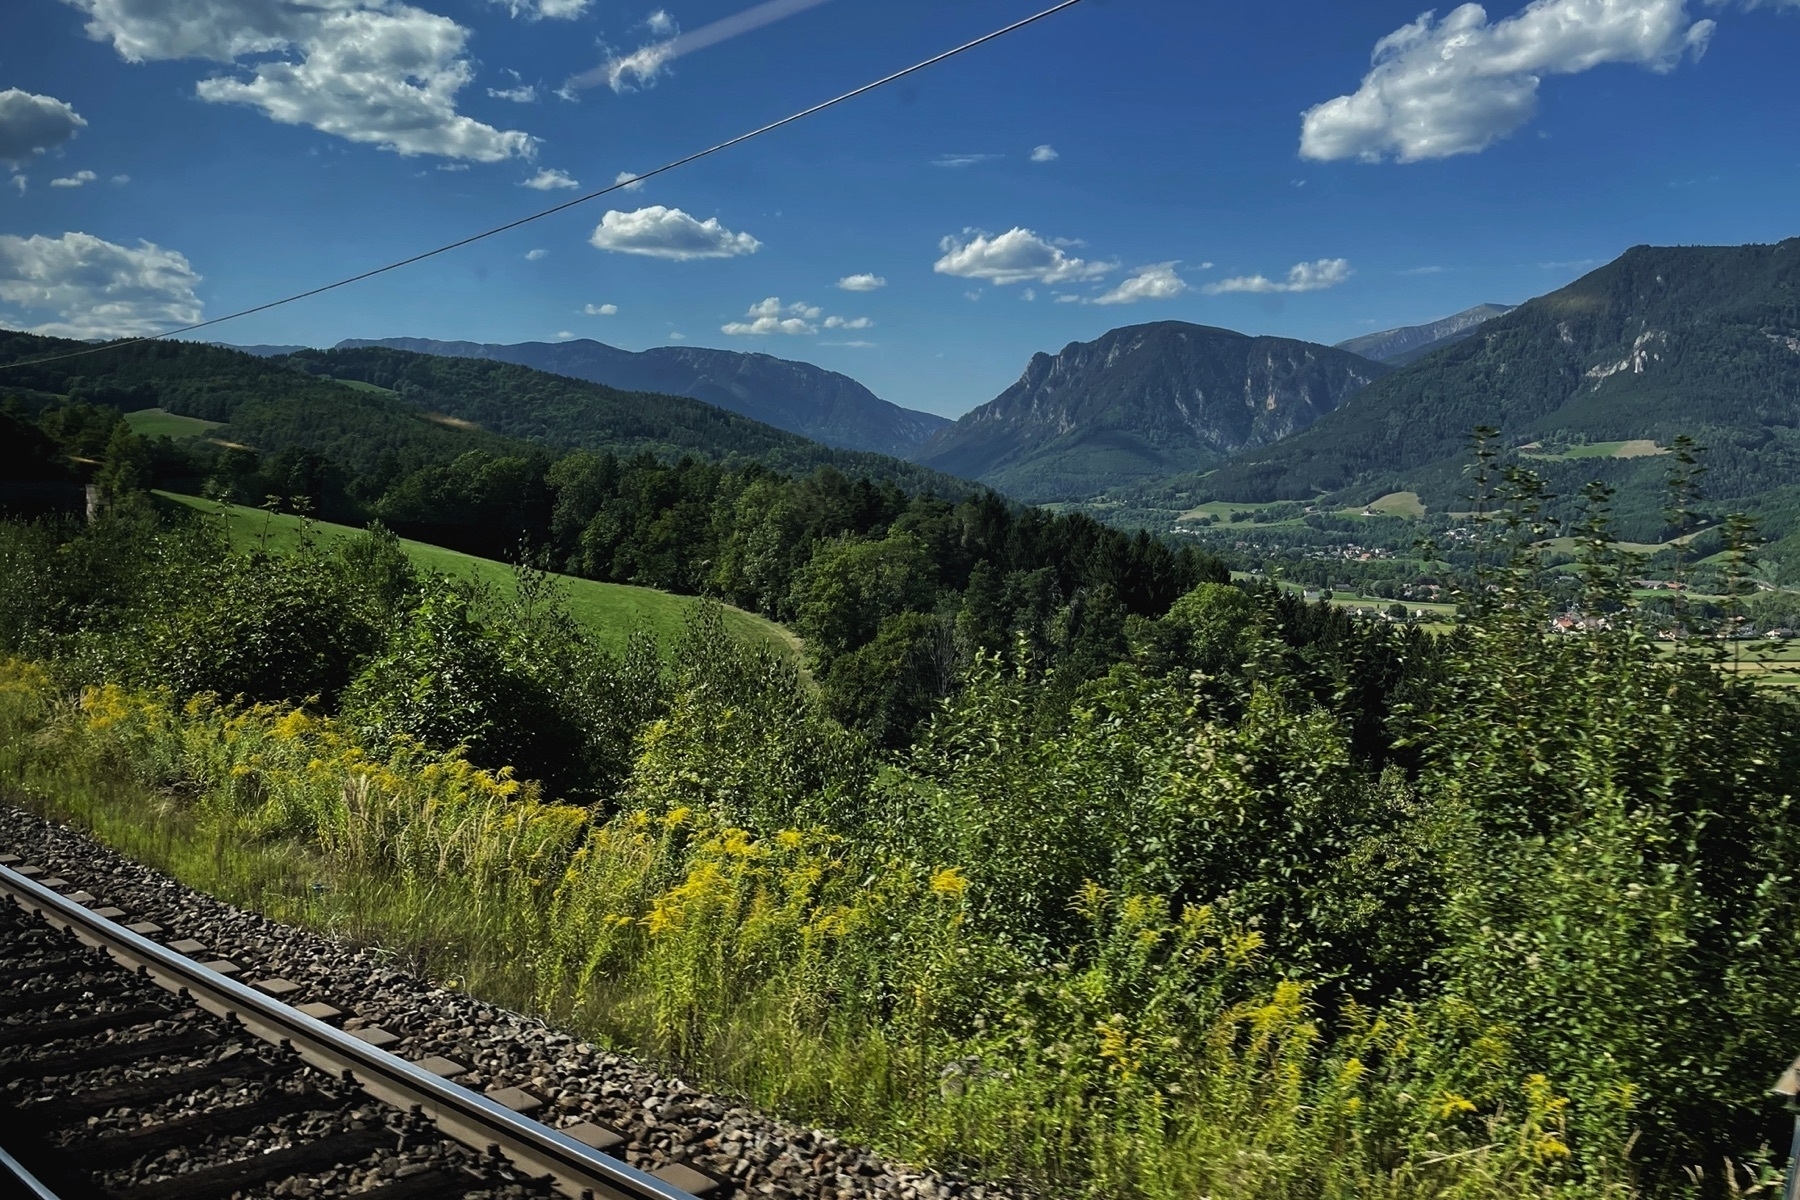 View of a train window, parts of the tracks in the foreground, in the back a valley with hills surrounding it and lots of forests